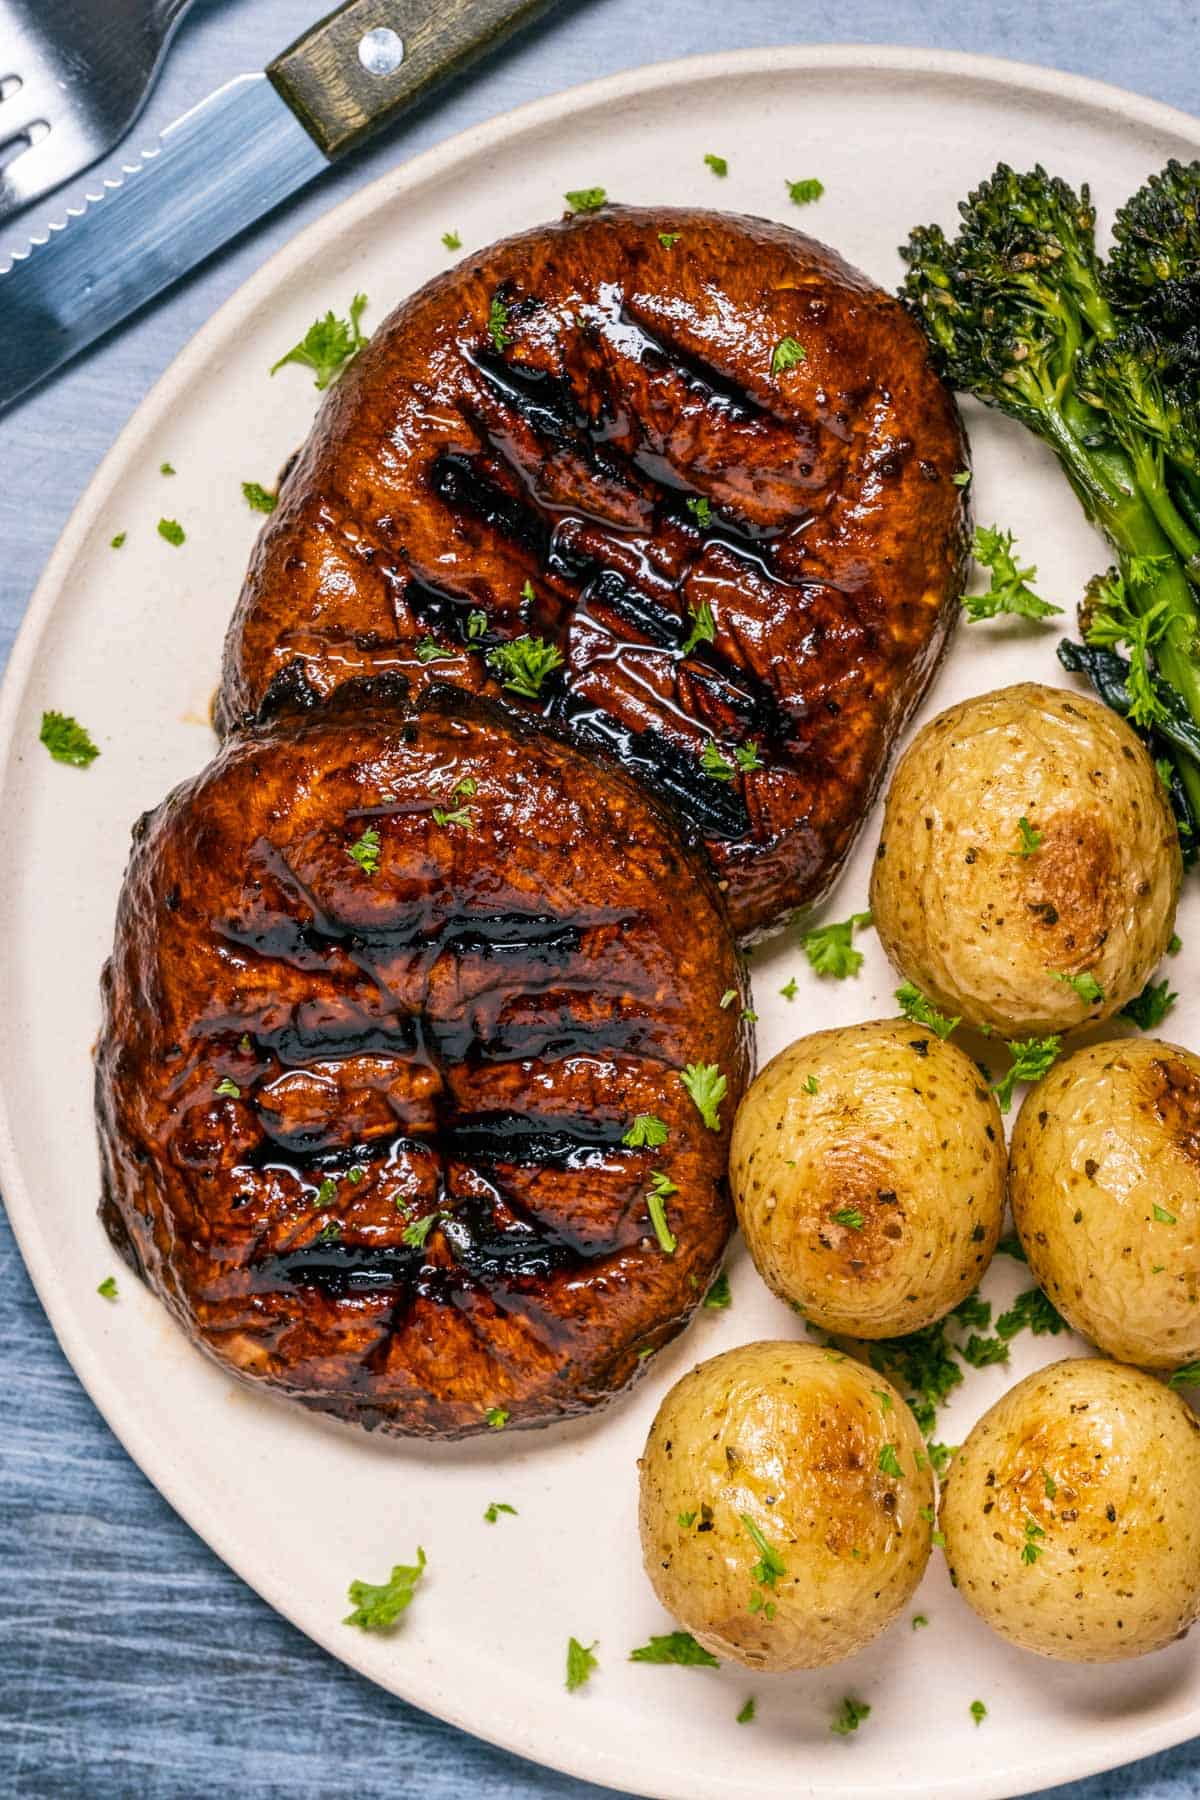 Portobello steaks on a plate with baby potatoes and broccoli.